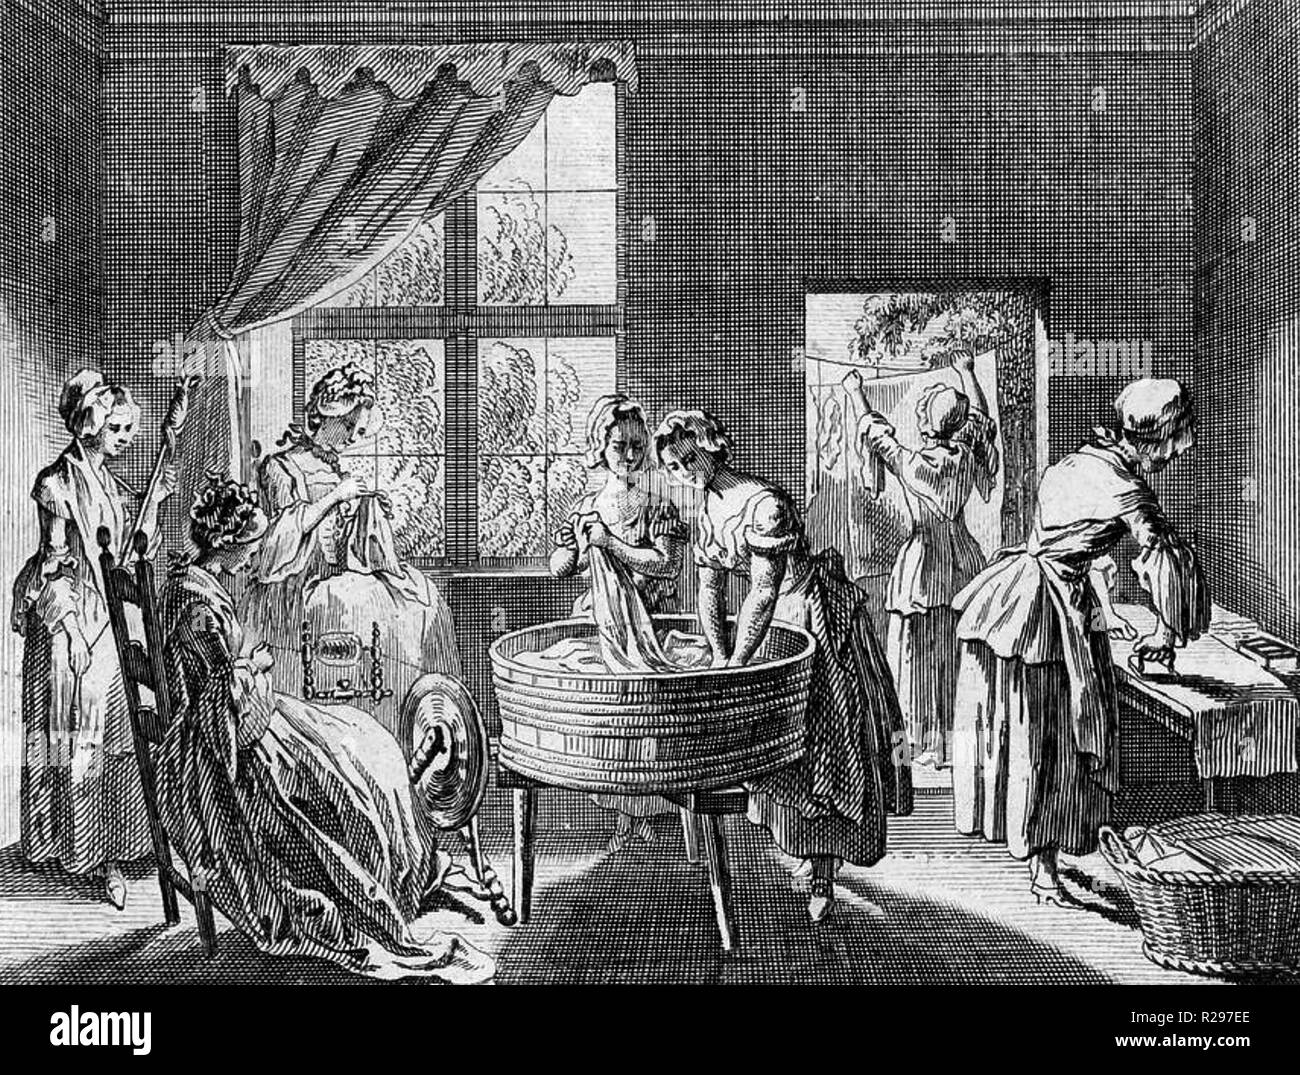 HOUSEWORK Servants in an 18th century English home doing domestic duties. Stock Photo